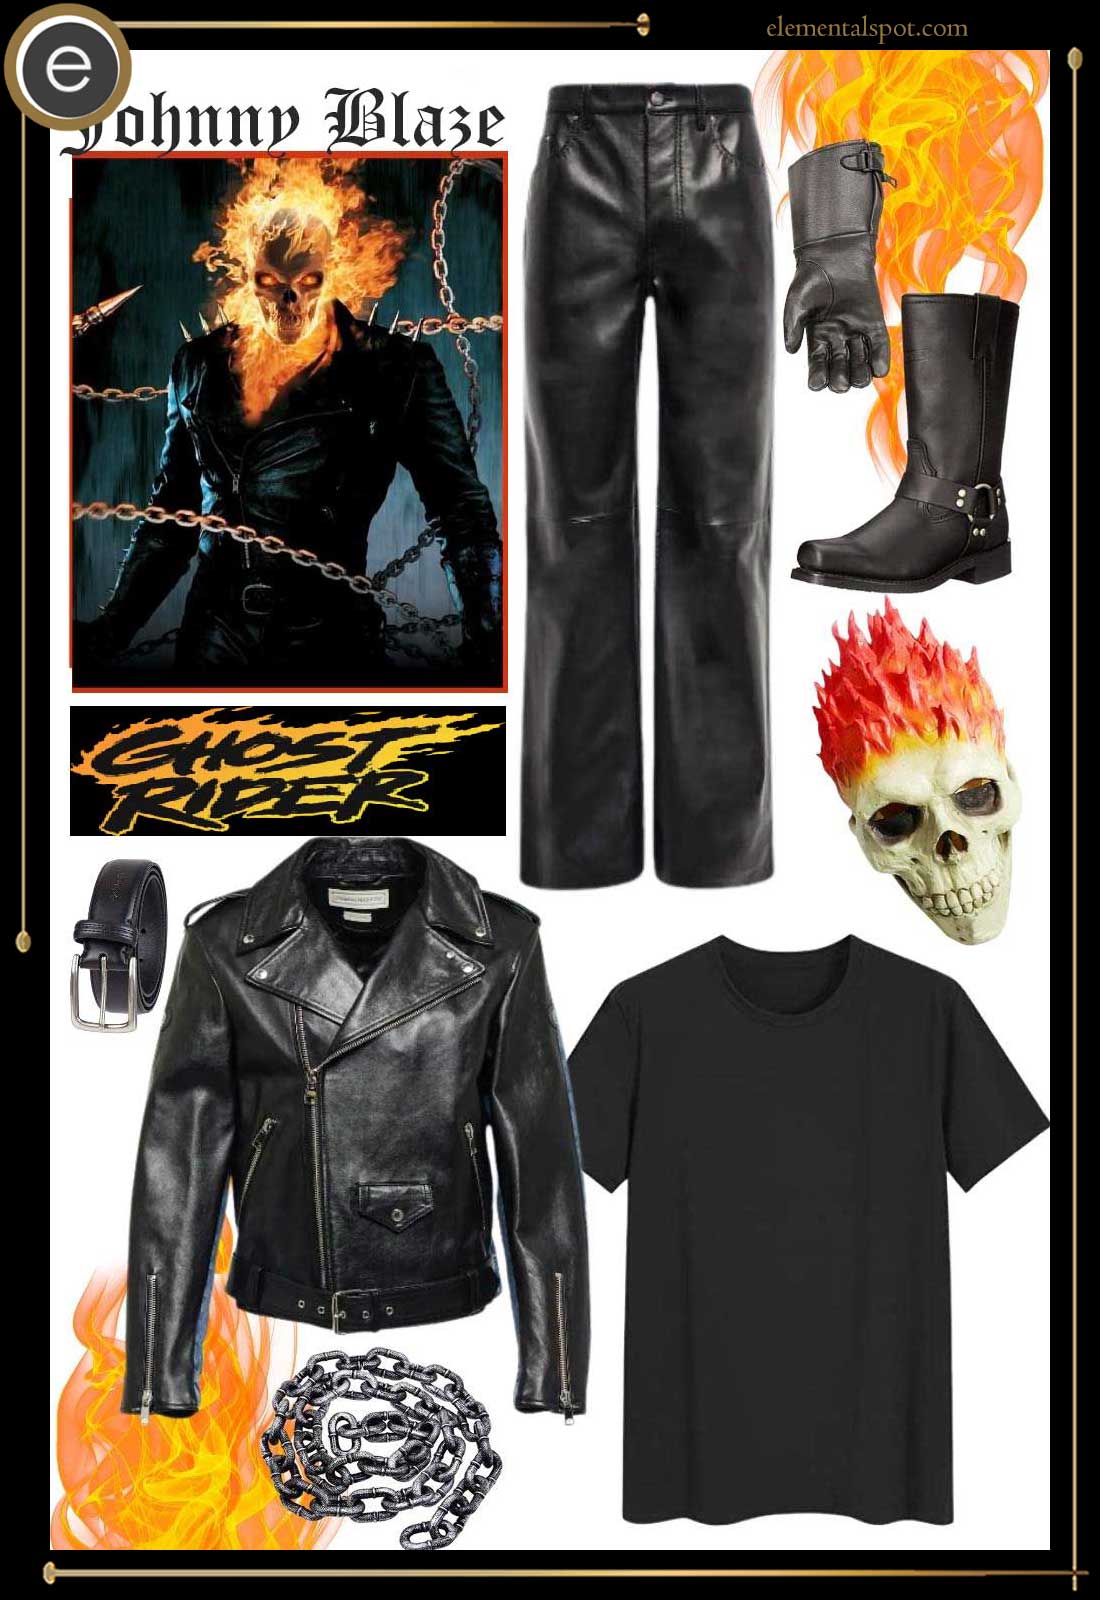 Ghost Rider (Johnny Blaze) - Incredible Characters Wiki